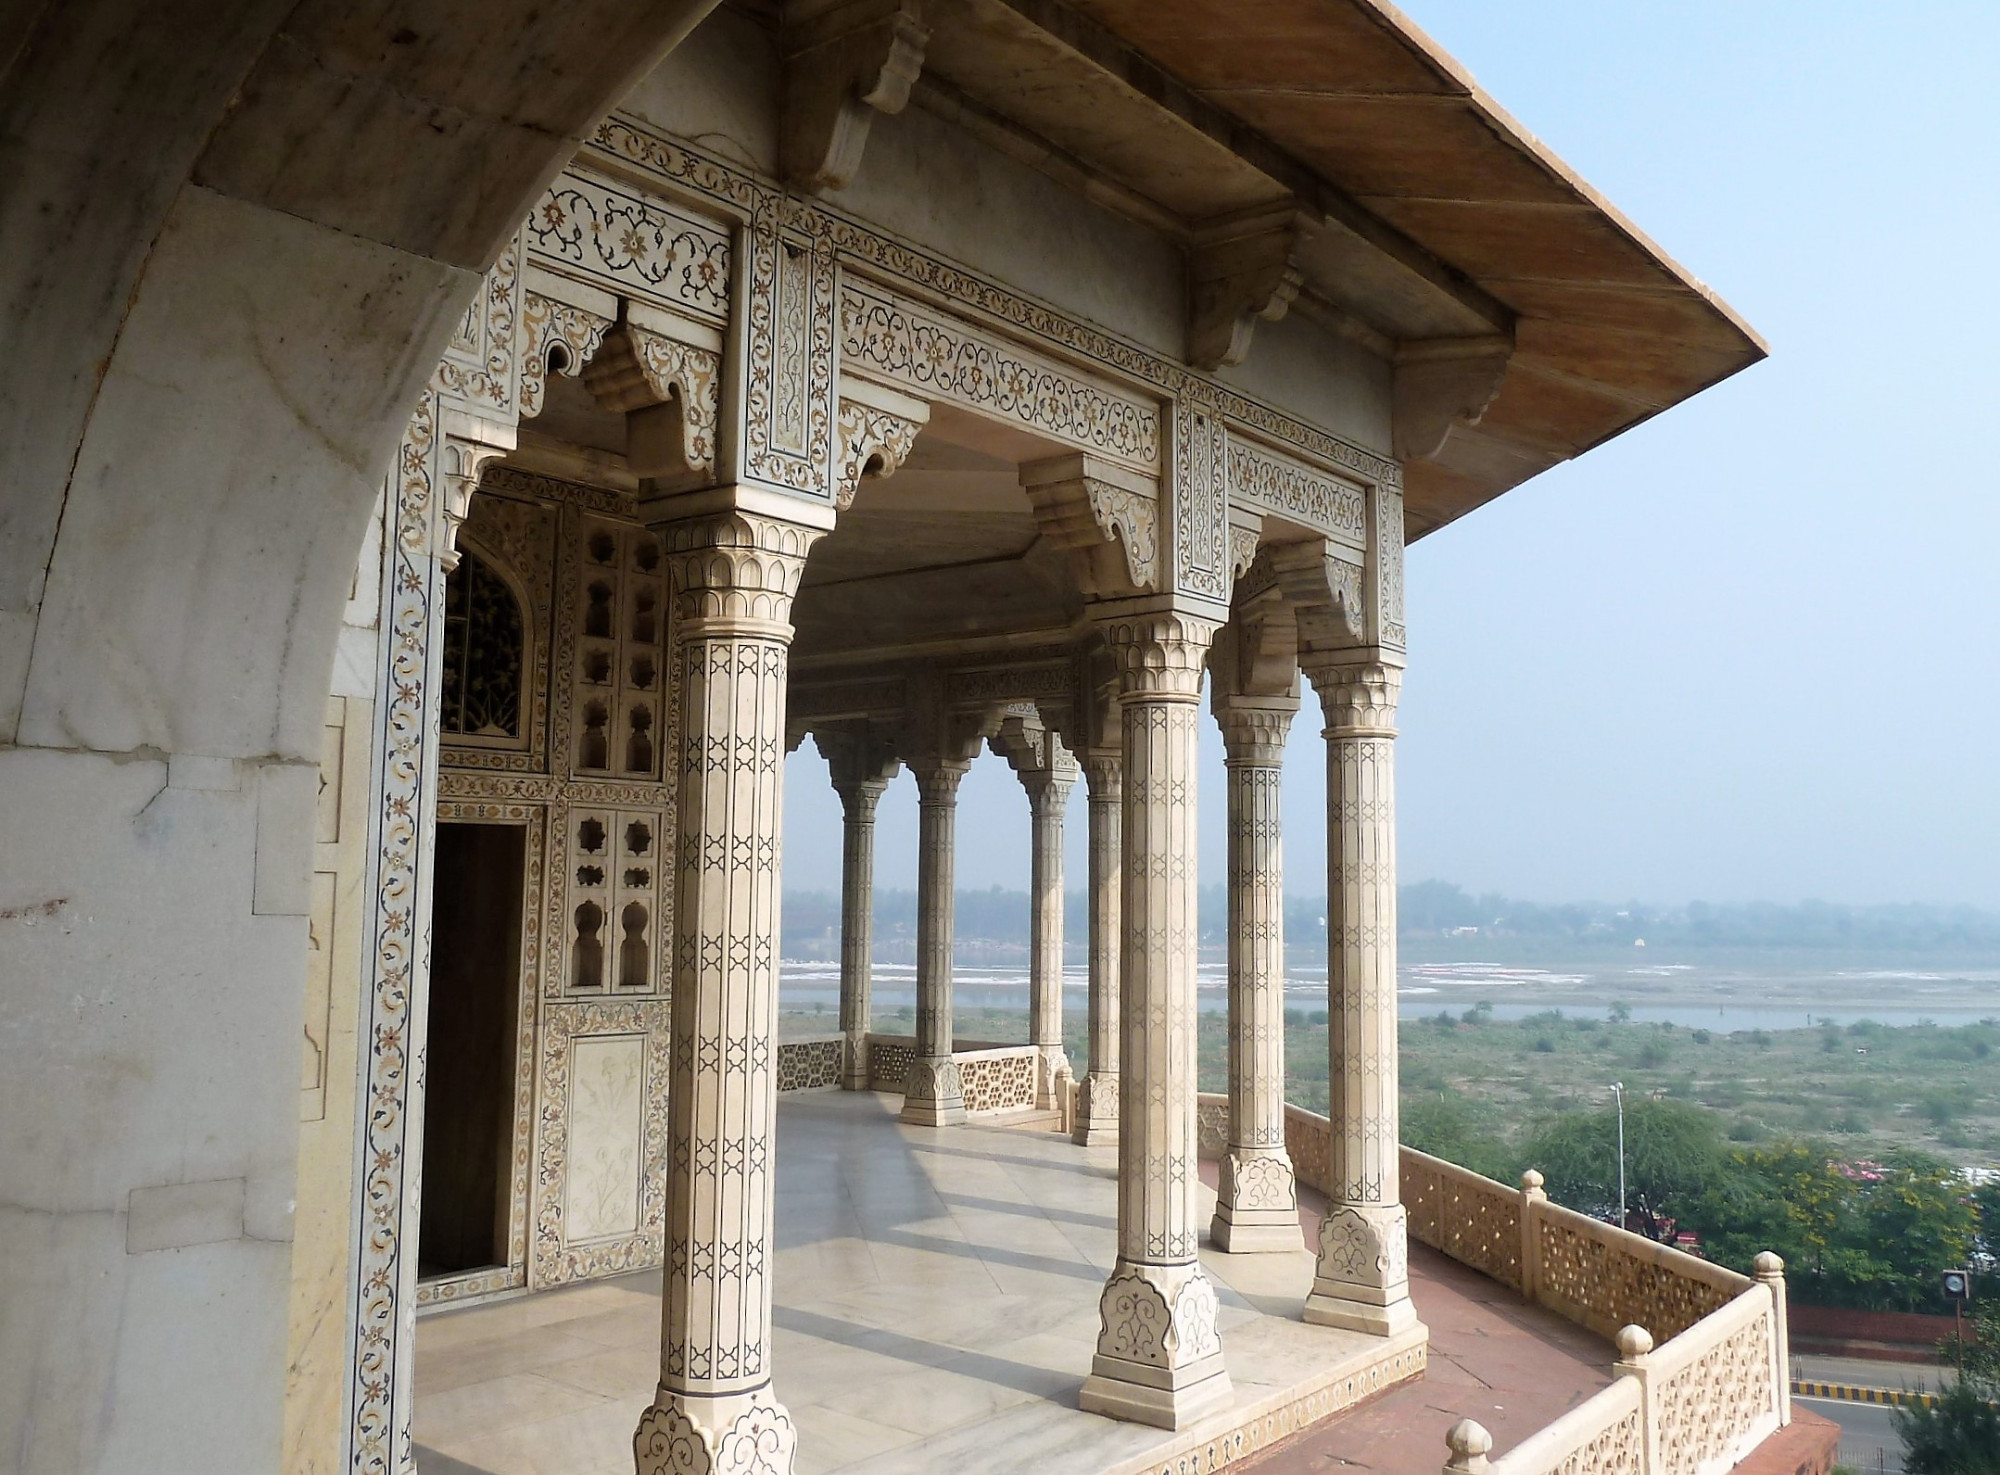 the balcony of the Mussaman Burj or Octagonal Tower…